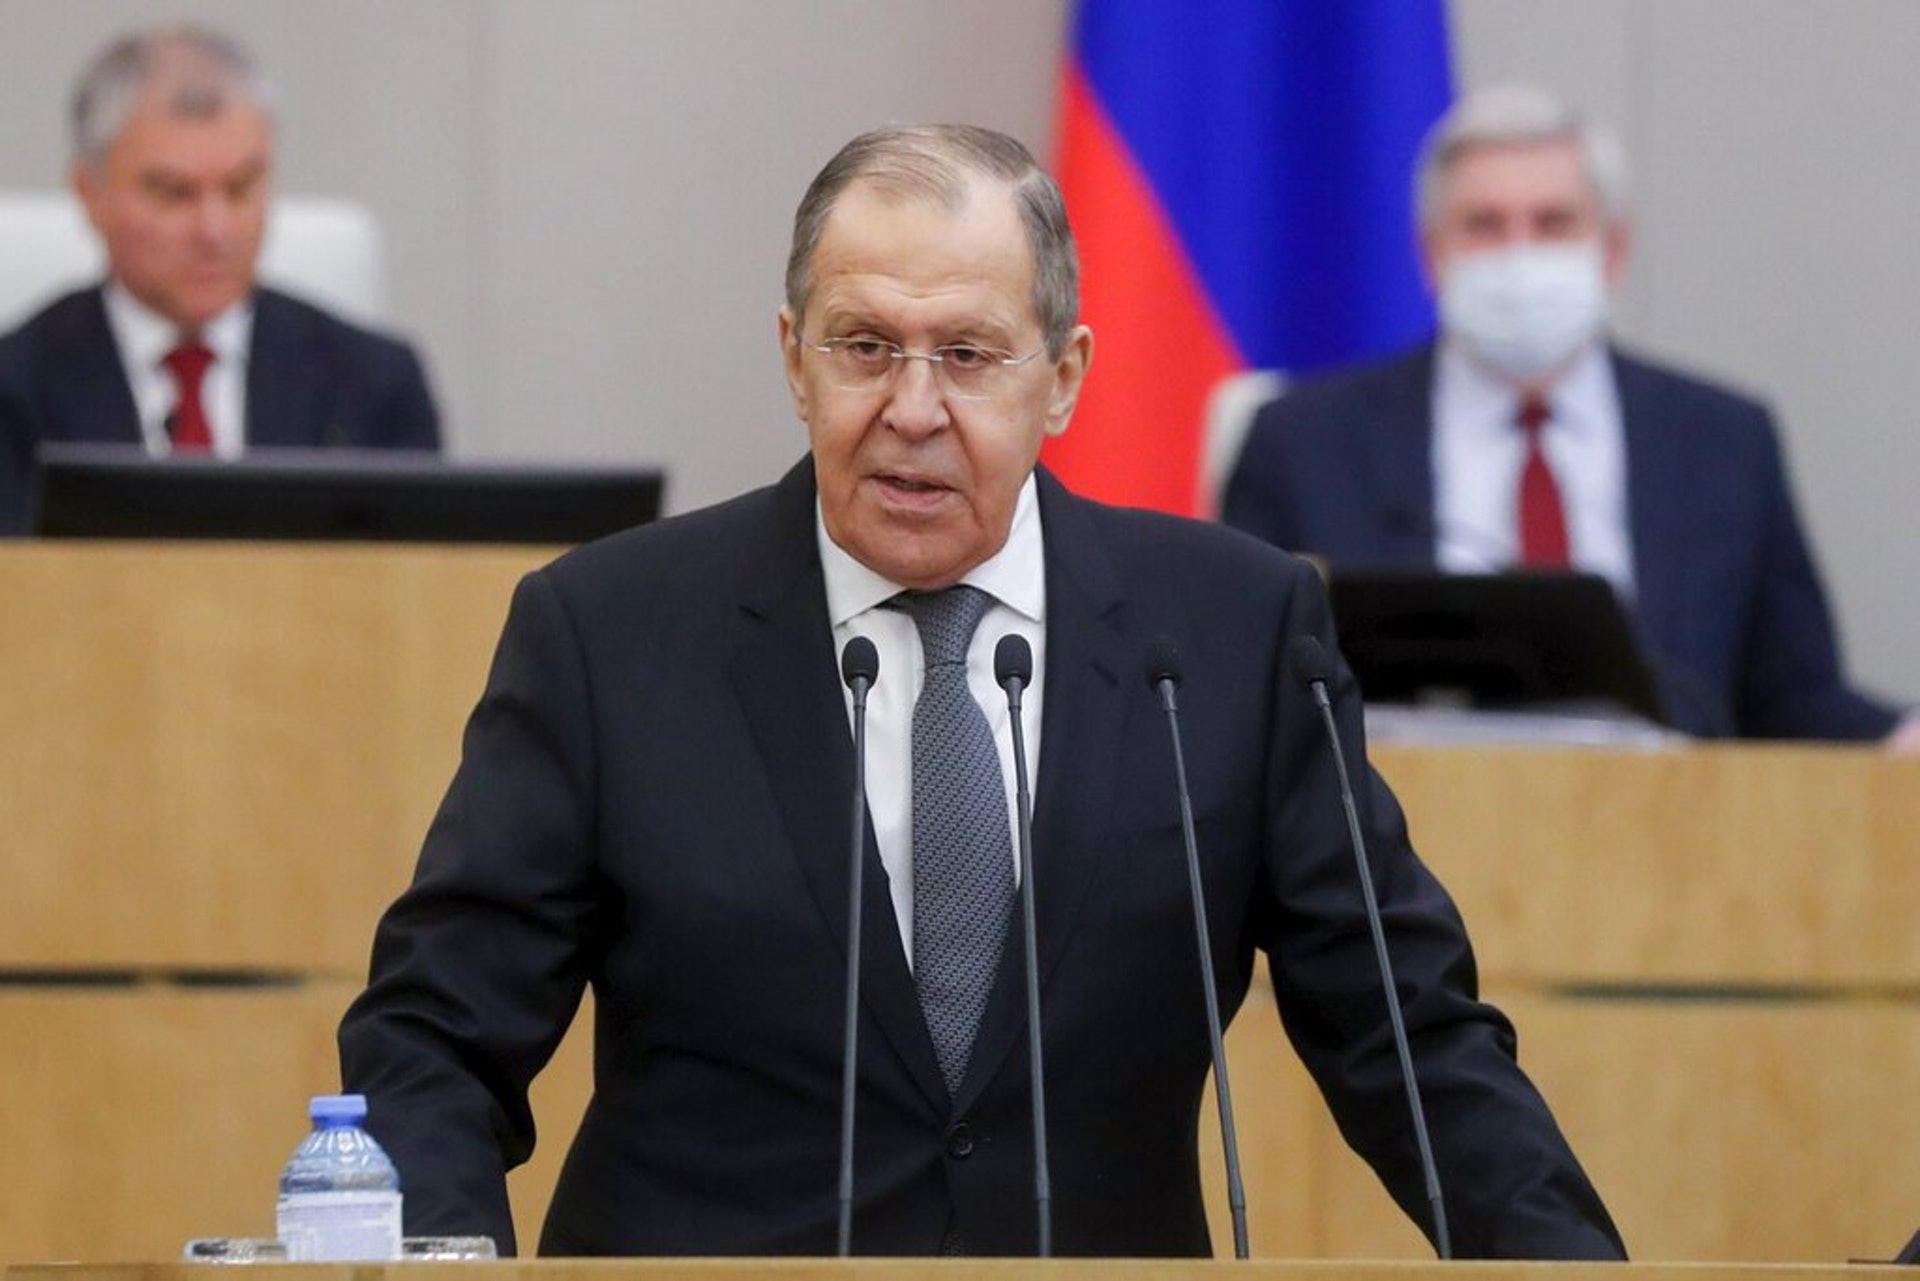 The picture shows Russian Foreign Minister Sergei Lavrov speaking at the State Duma in Moscow.